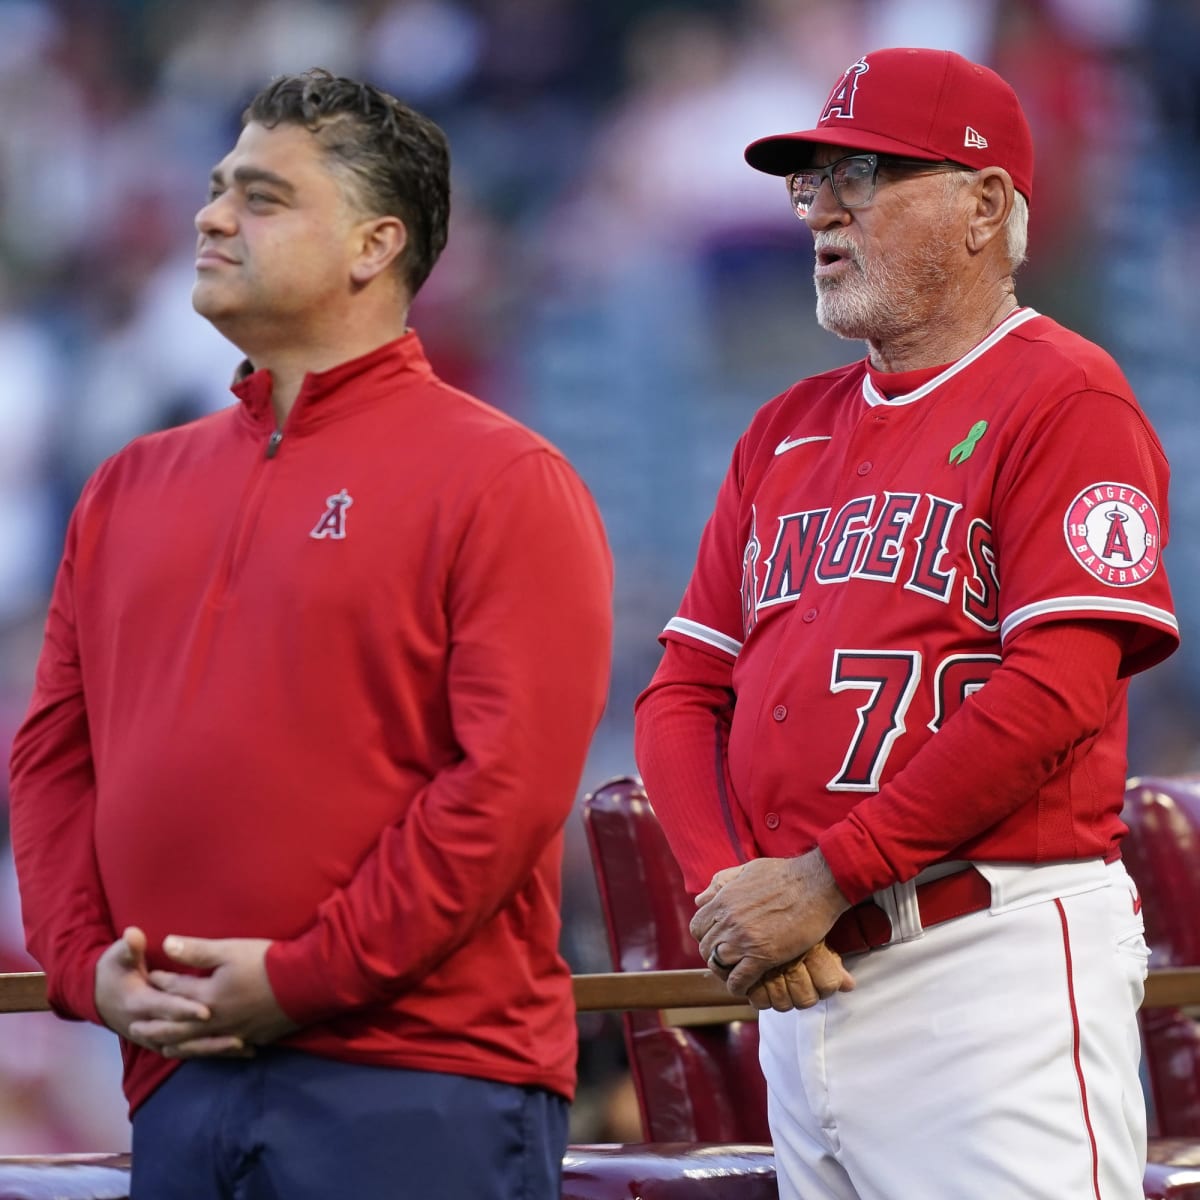 Blue Jays memories hit for Angels GM Perry Minasian ahead of